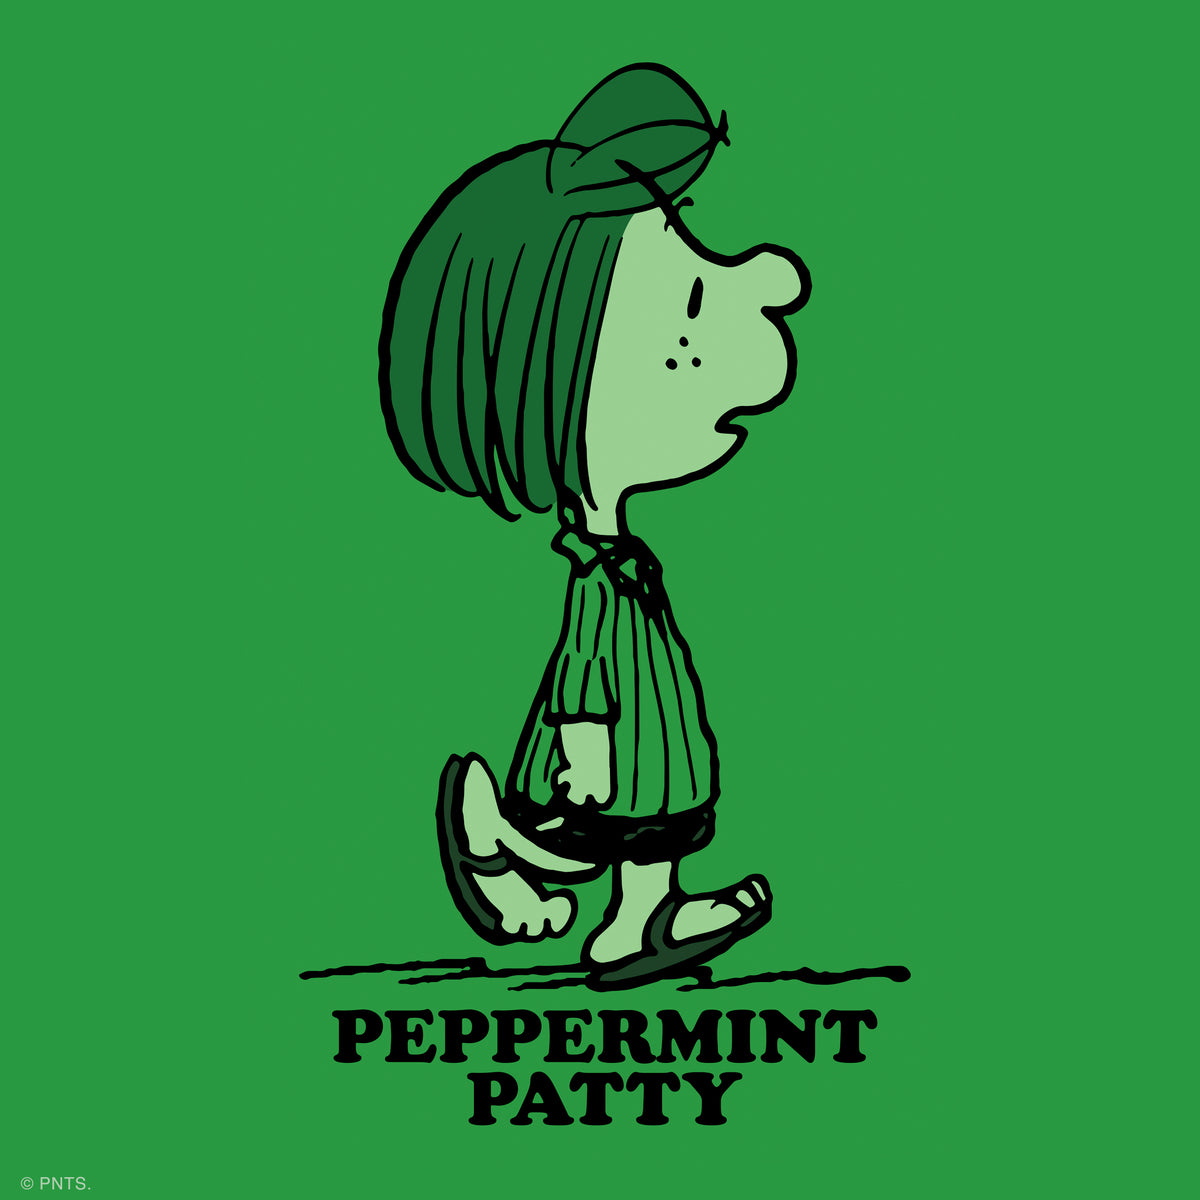 Super7 Supersize: Charlie Brown - Peppermint Patty